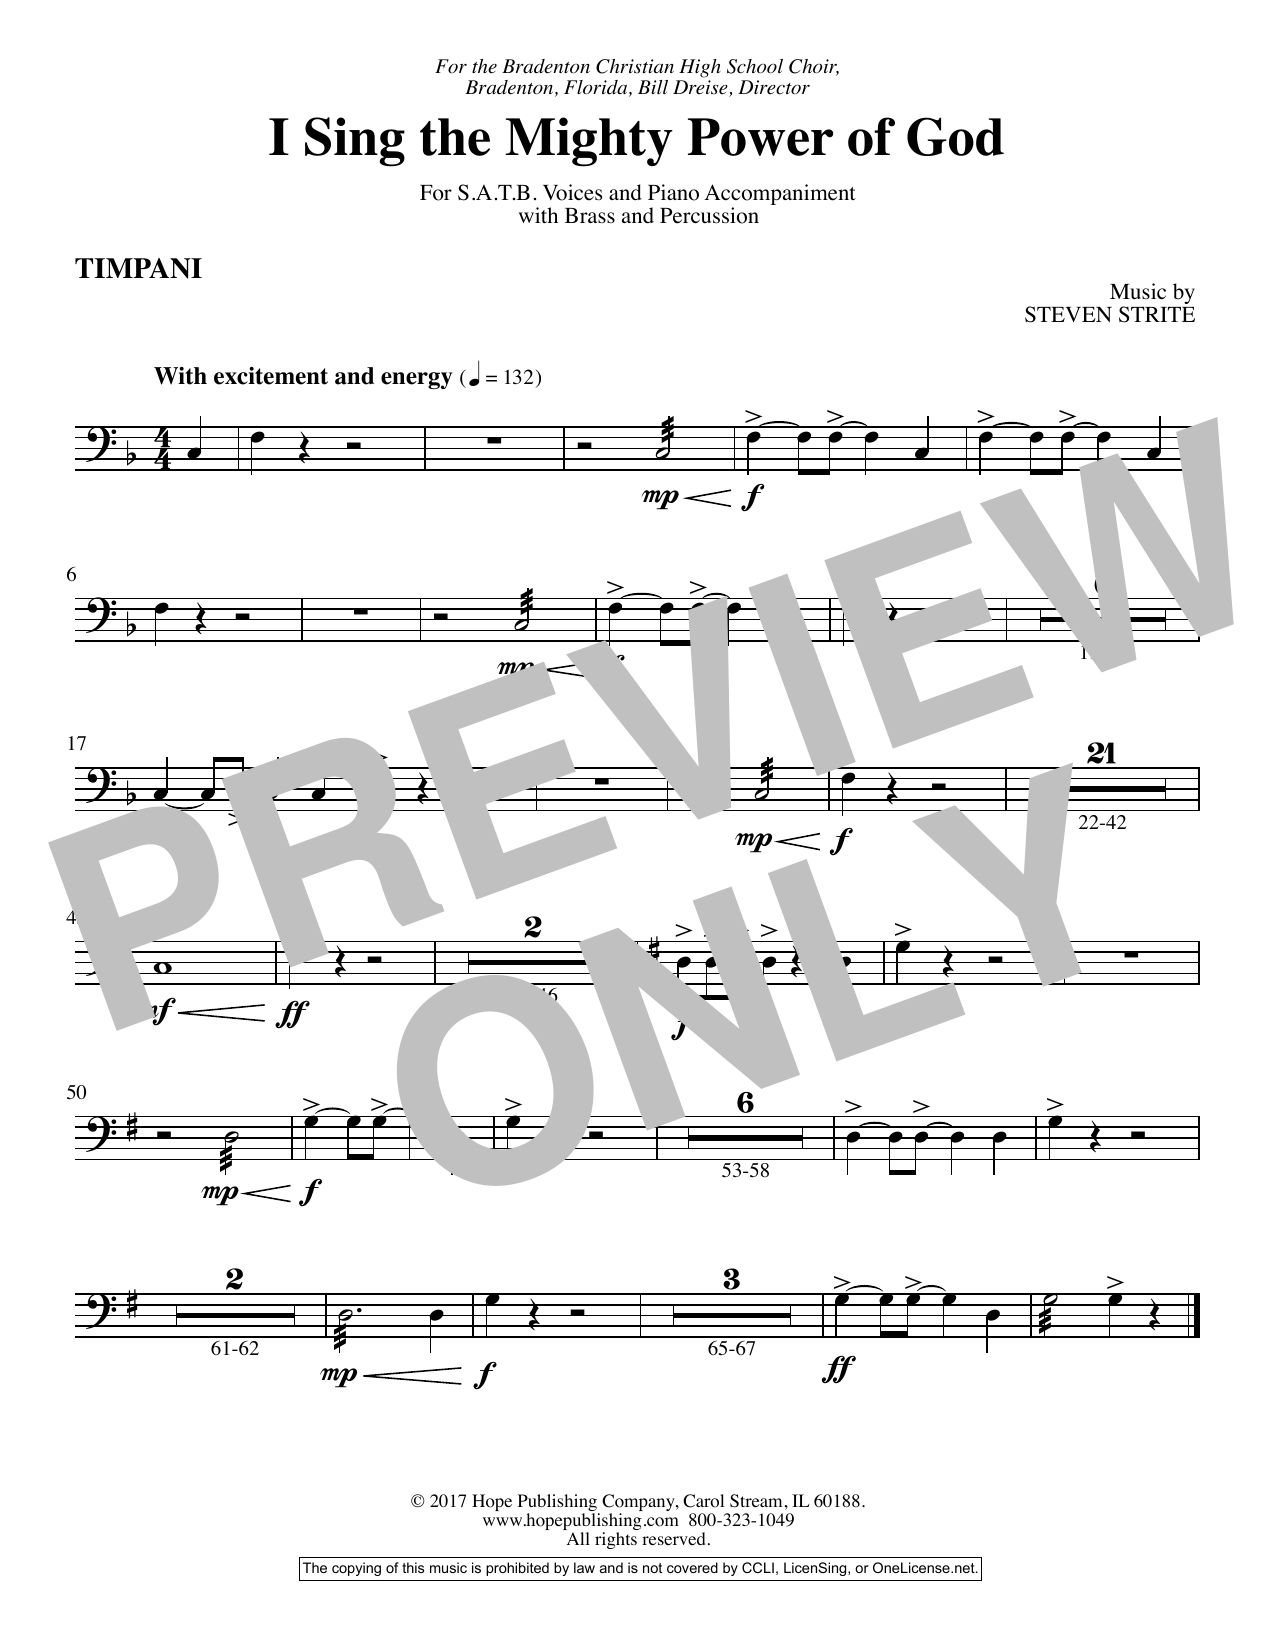 Download Steven Strite I Sing the Mighty Power of God - Timpan Sheet Music